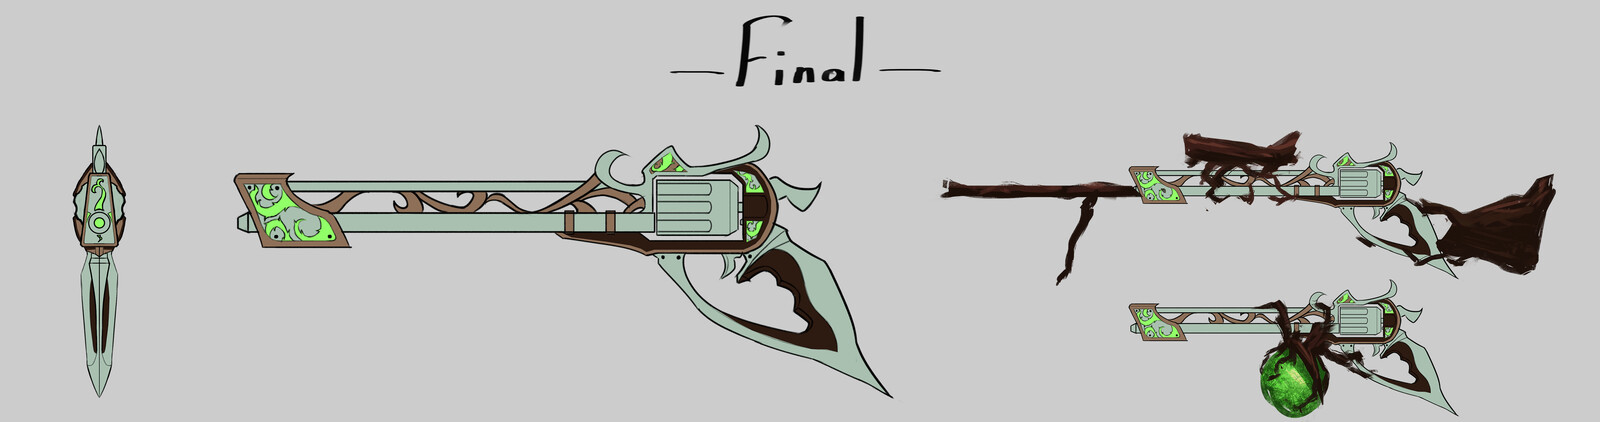 final concept for the gun with a couple of modifications